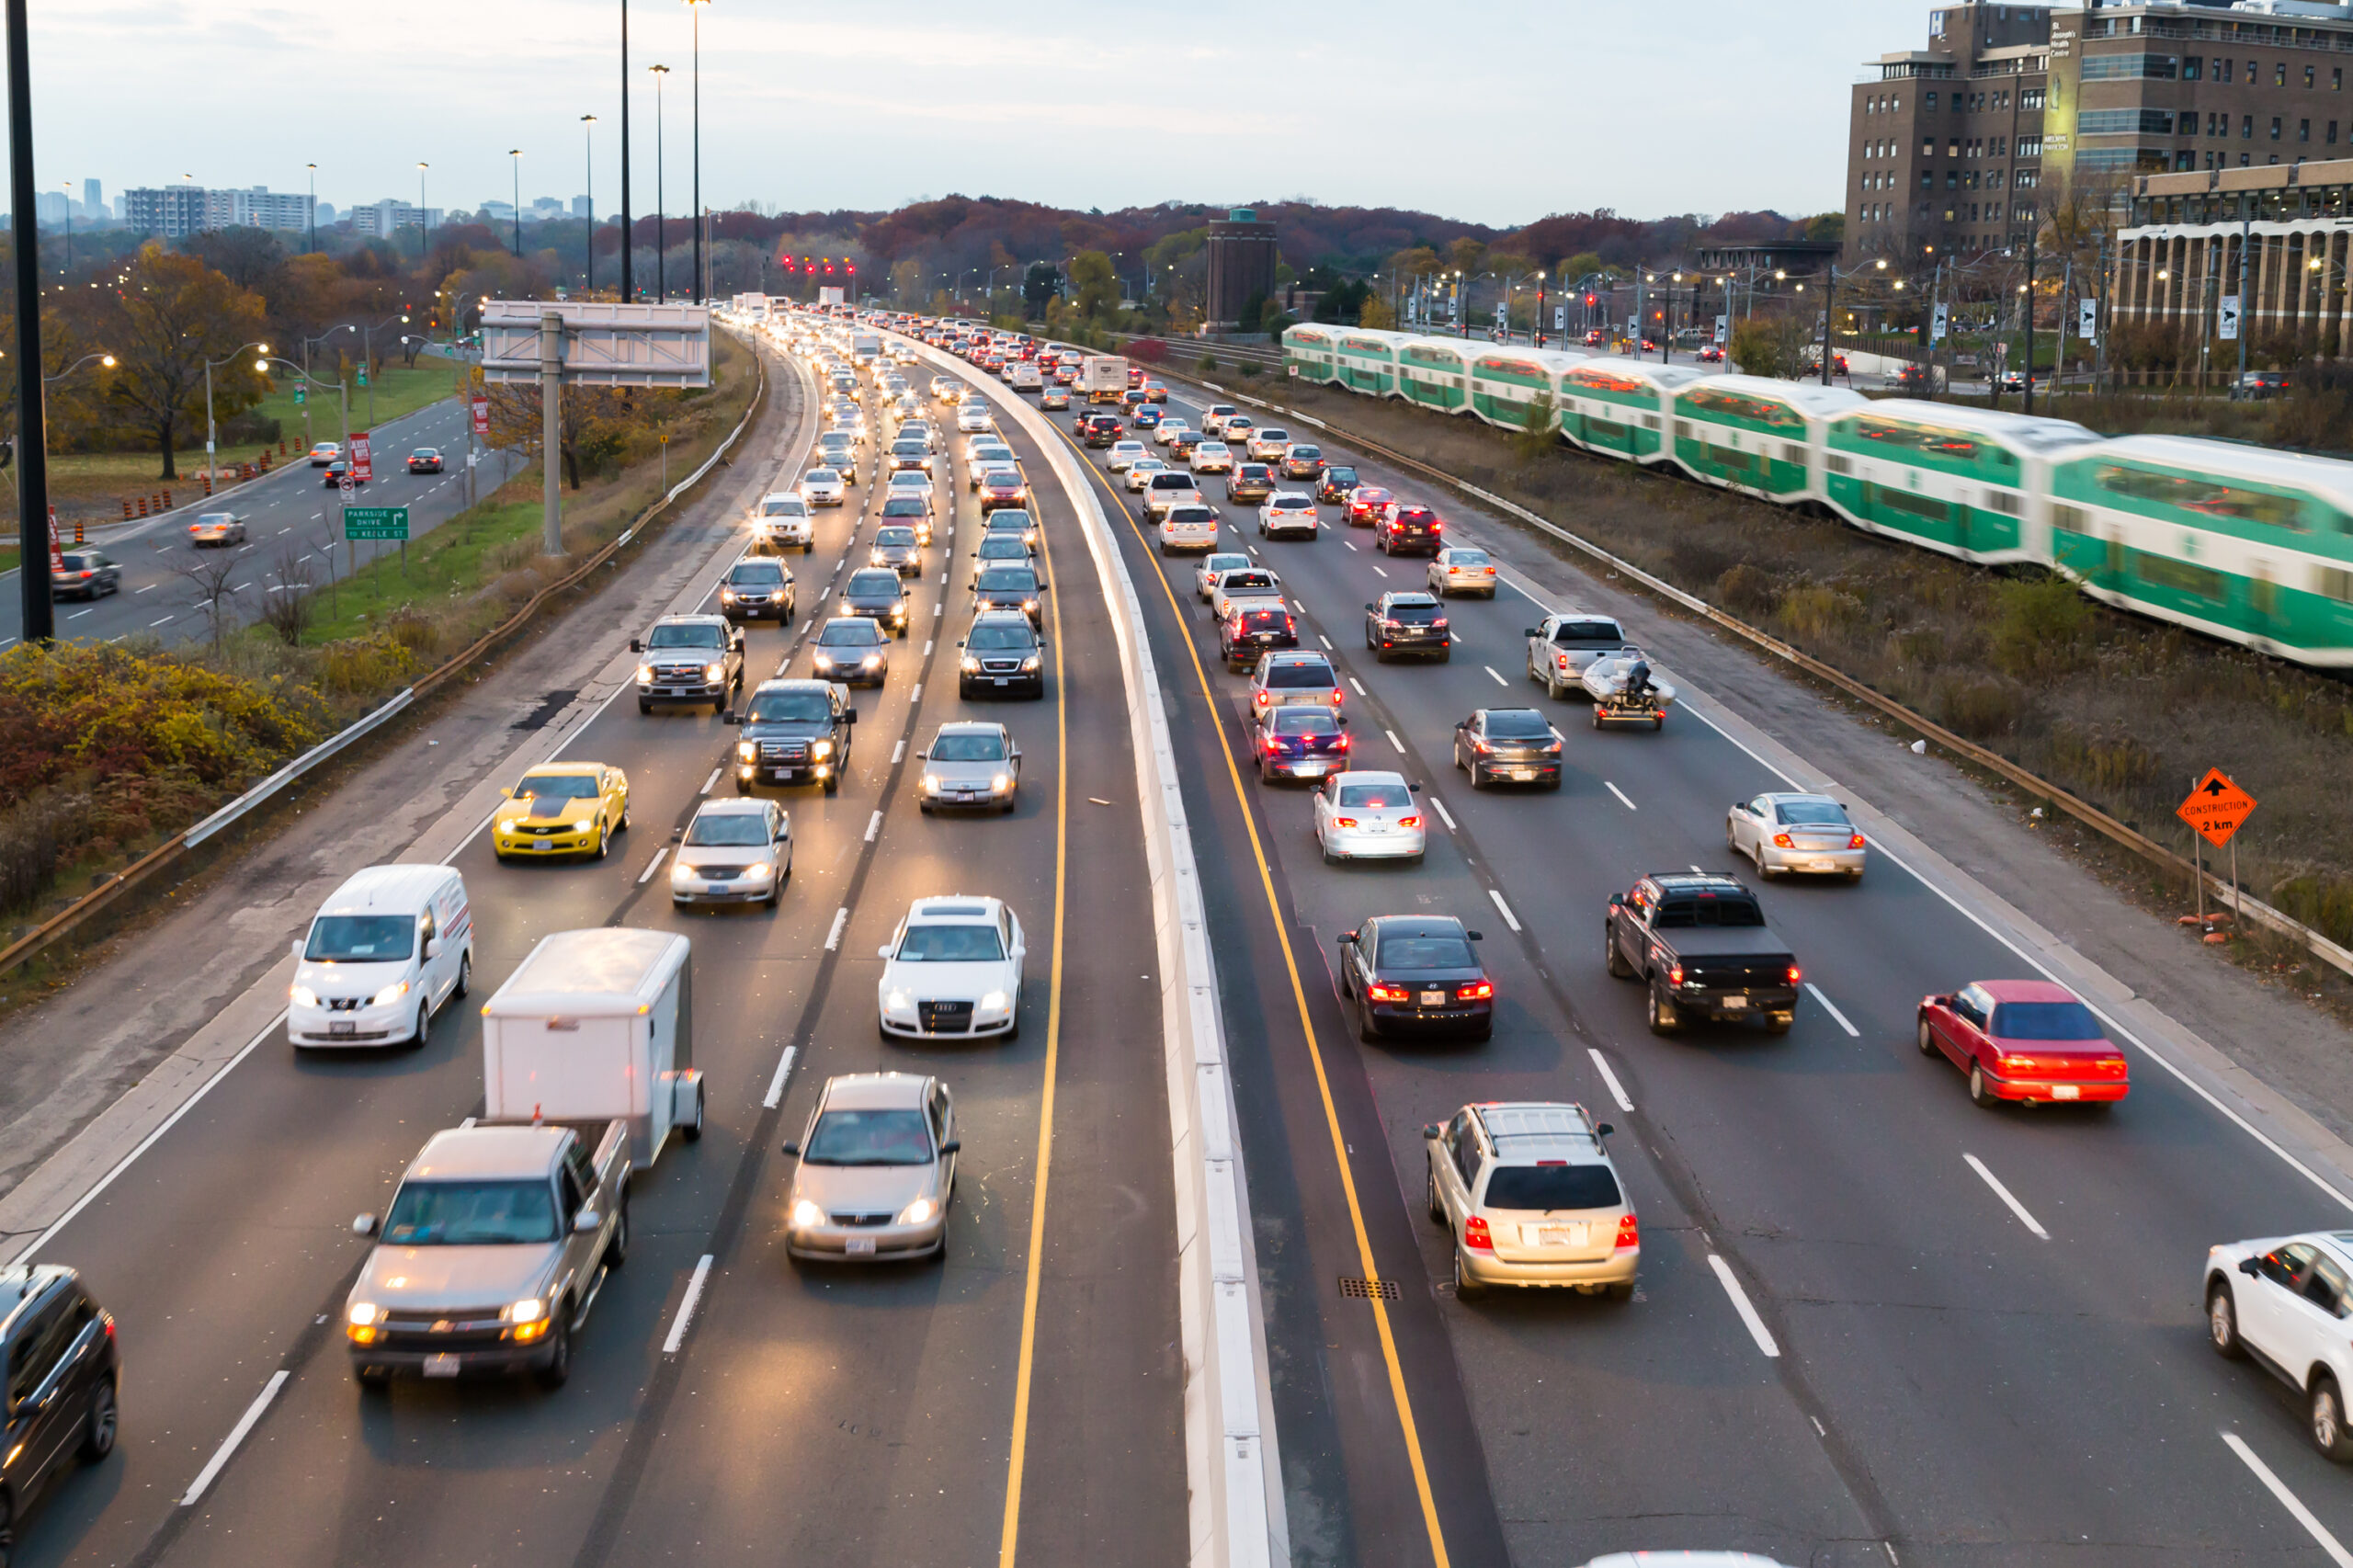 A view of traffic on the Gardiner Express at rush hour. Many vehicles can be seen in the image